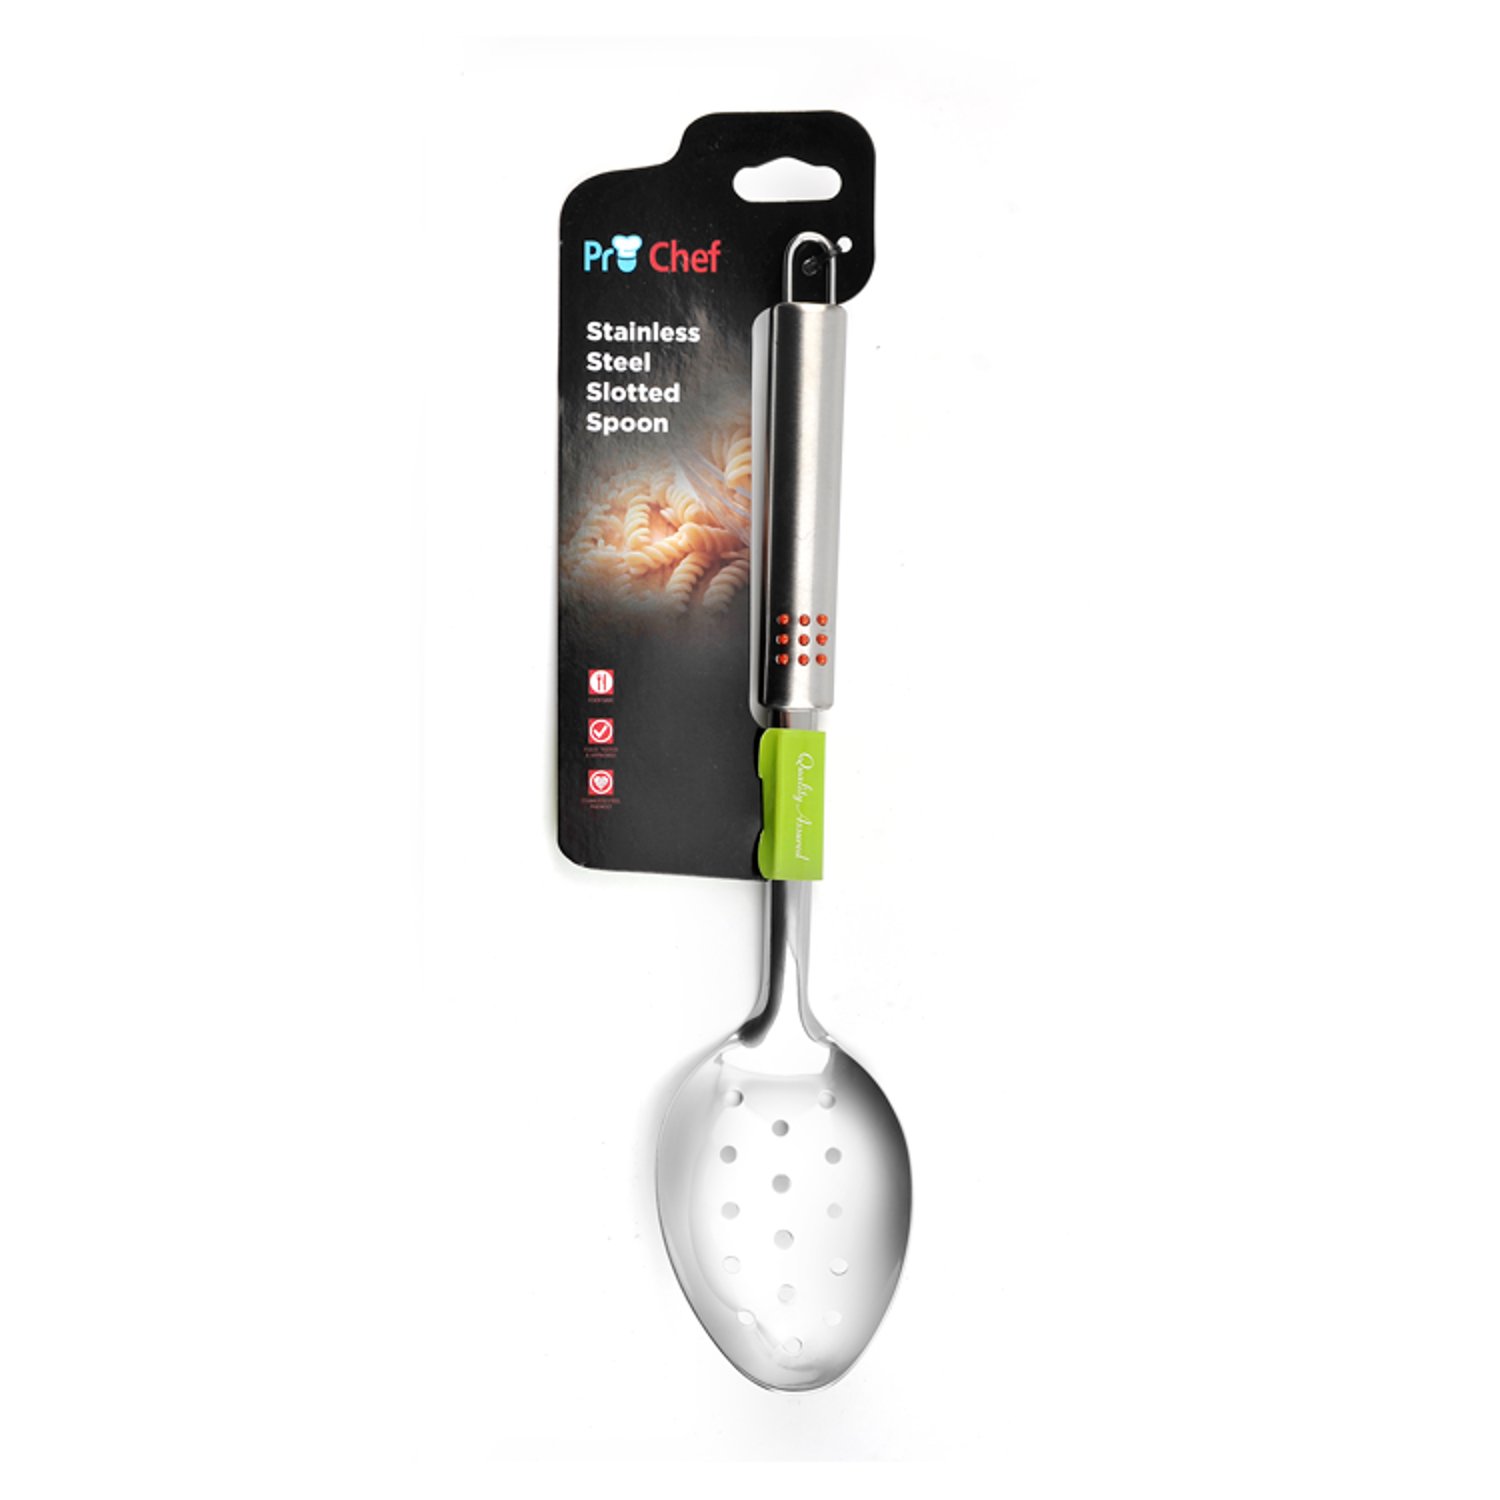 Pro Chef Slotted Spoon (1 Piece)